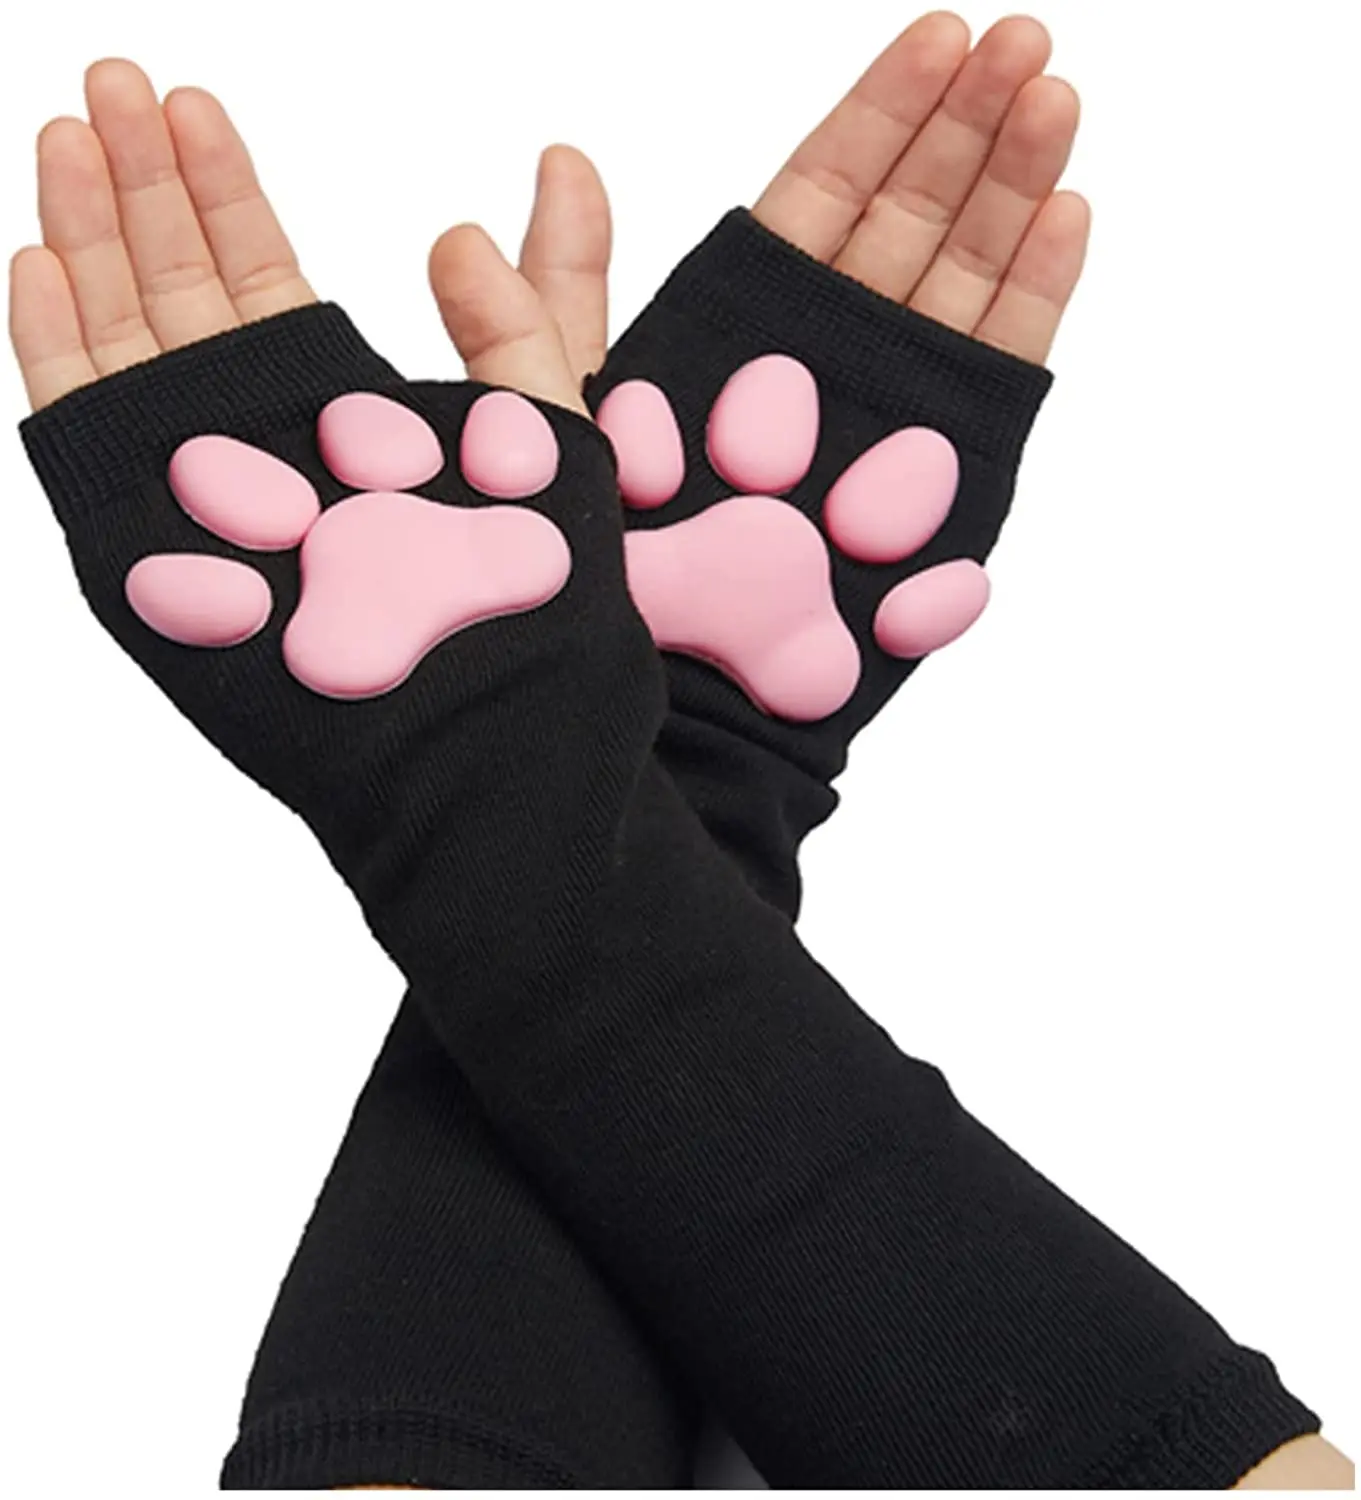 UV Sun Protection Stretchy Cute Cat Claw 3D Toes Beans Fingerless Sleeves Tattoo Cover Up Outdoor Sports Arm Sleeves Warm Gloves children s ice sleeves summer thin cute cartoon sleeve sleeves for boys and girls uv protection silk arm protector sun protect